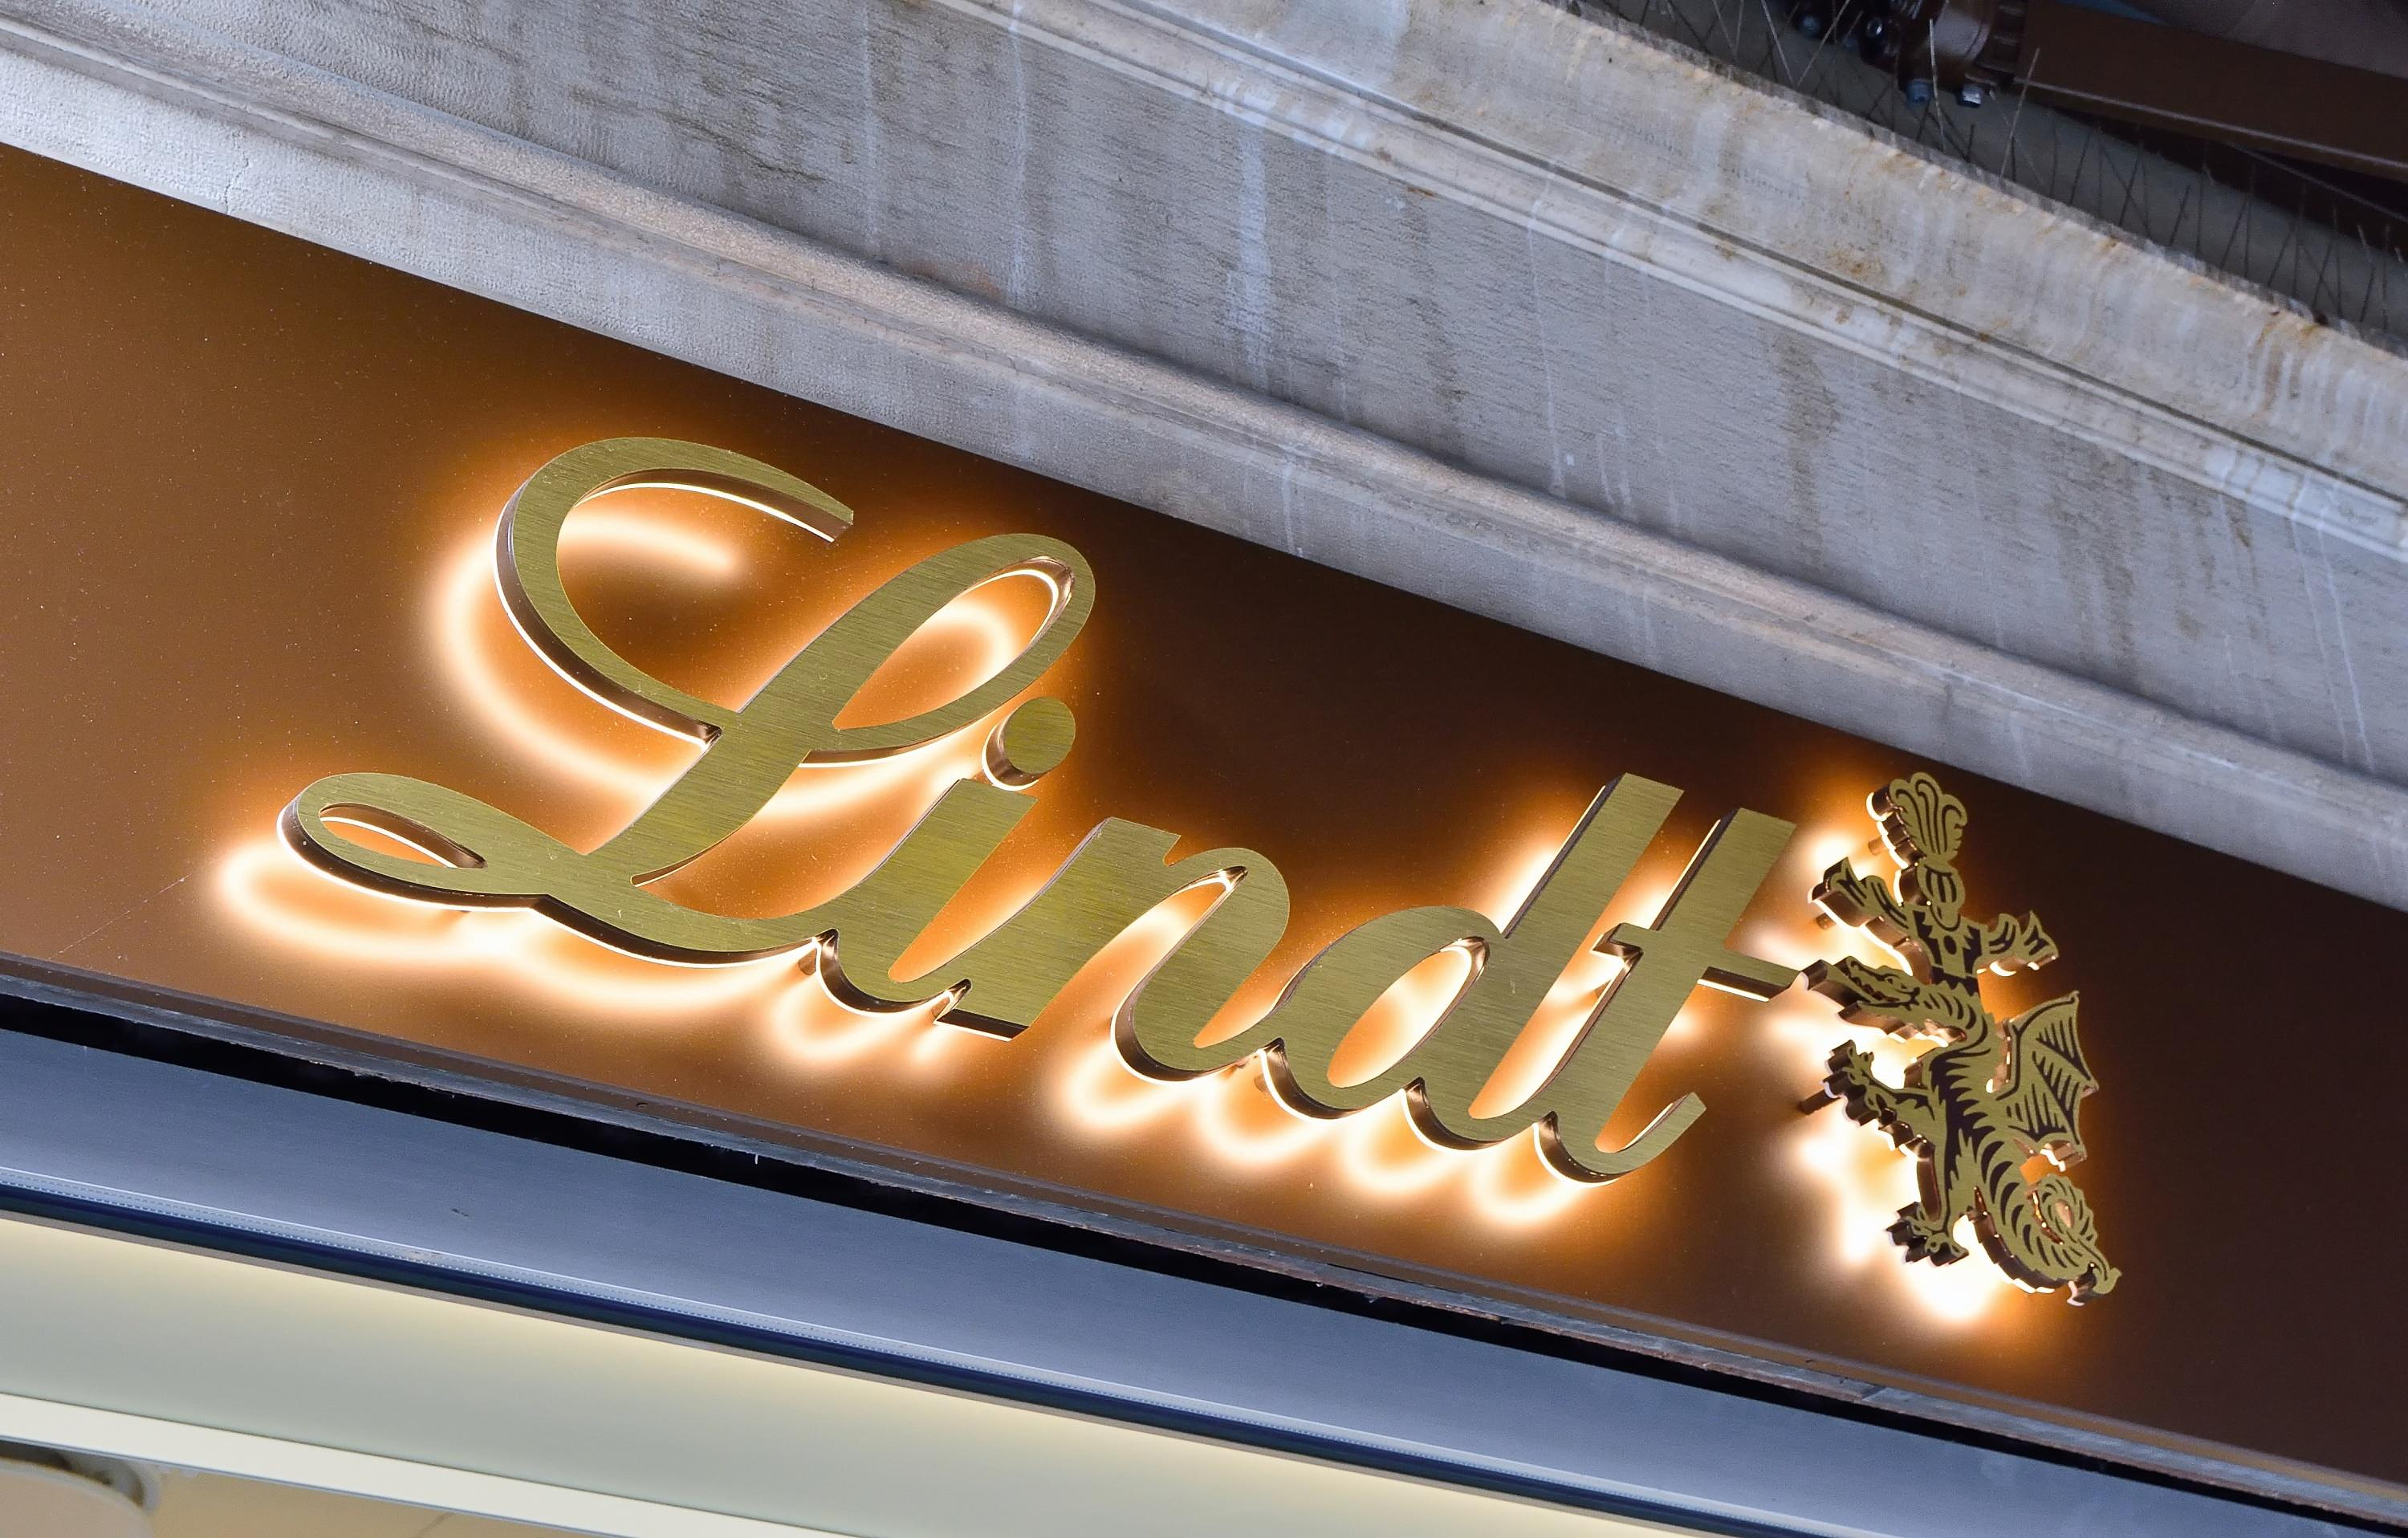 Despite price increases, Lindt sells its chocolates and bars